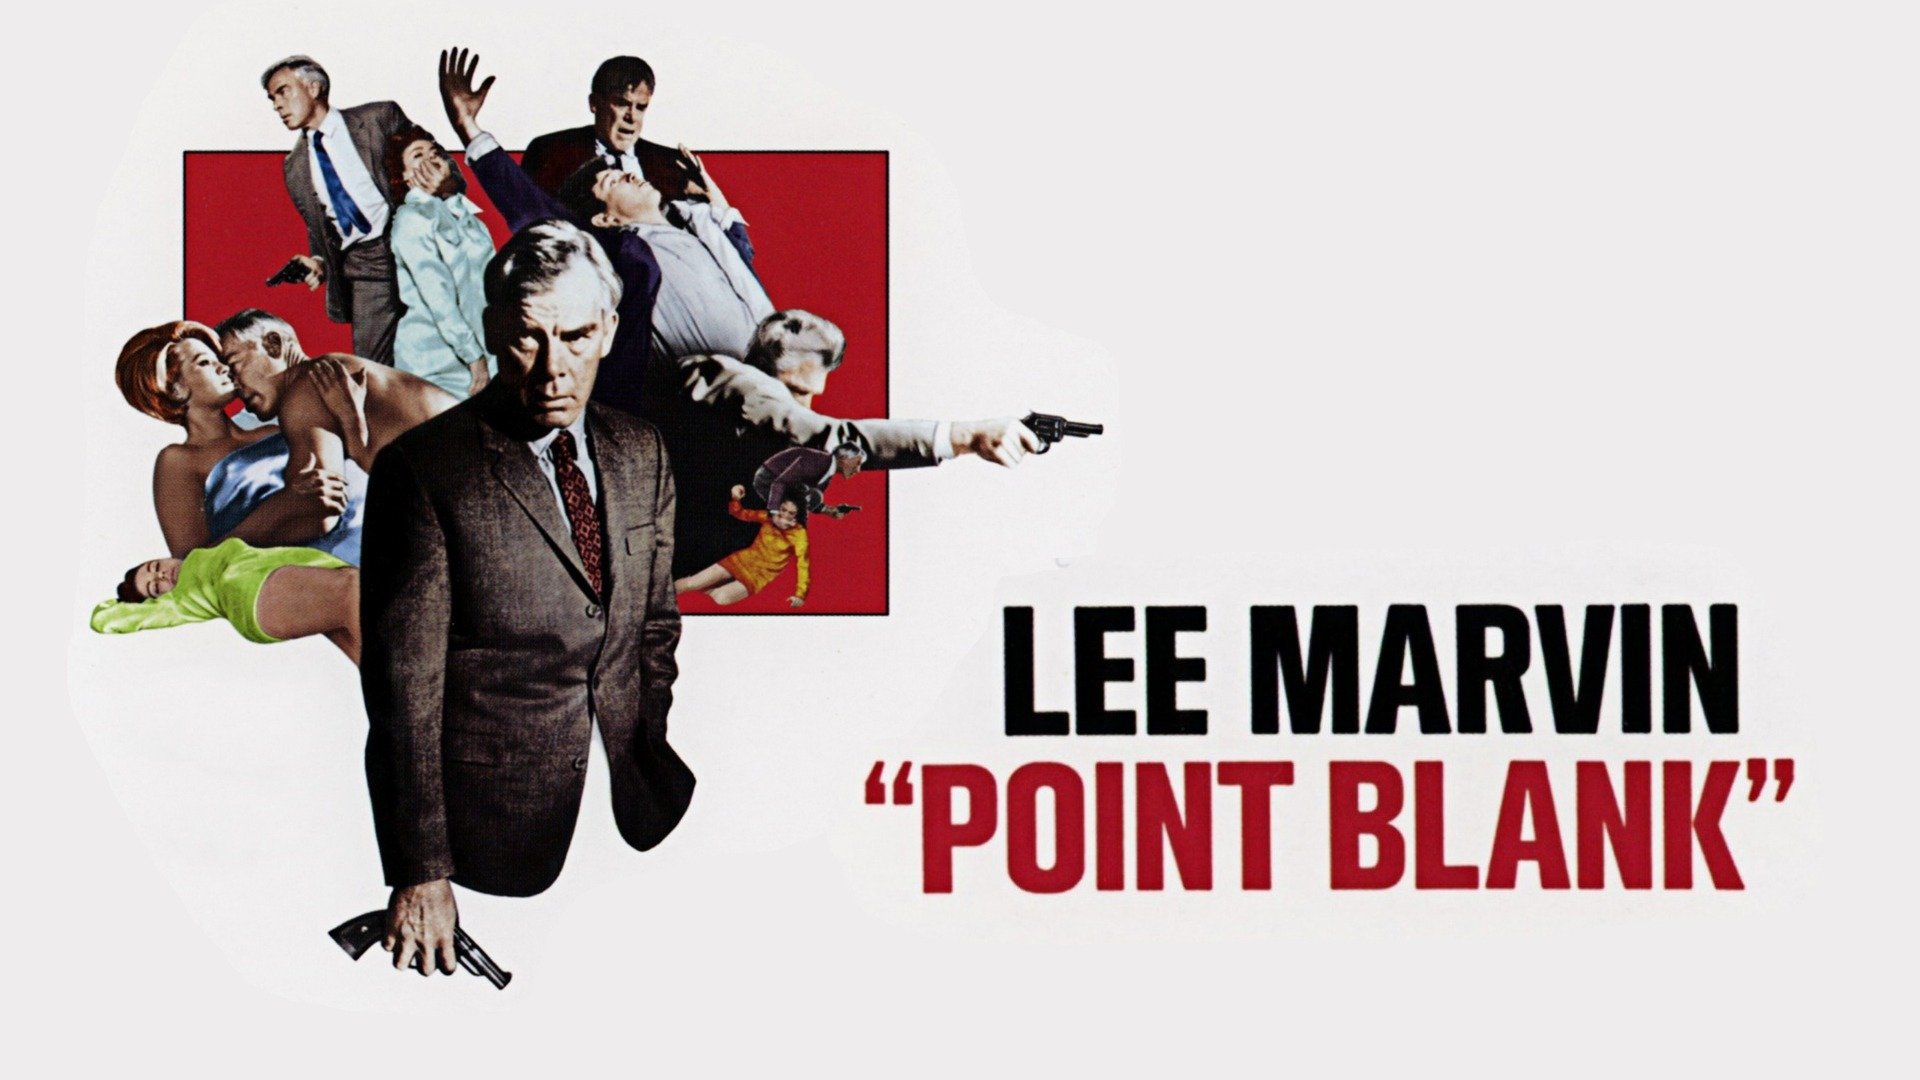 Lee Marvin "Point Blank"